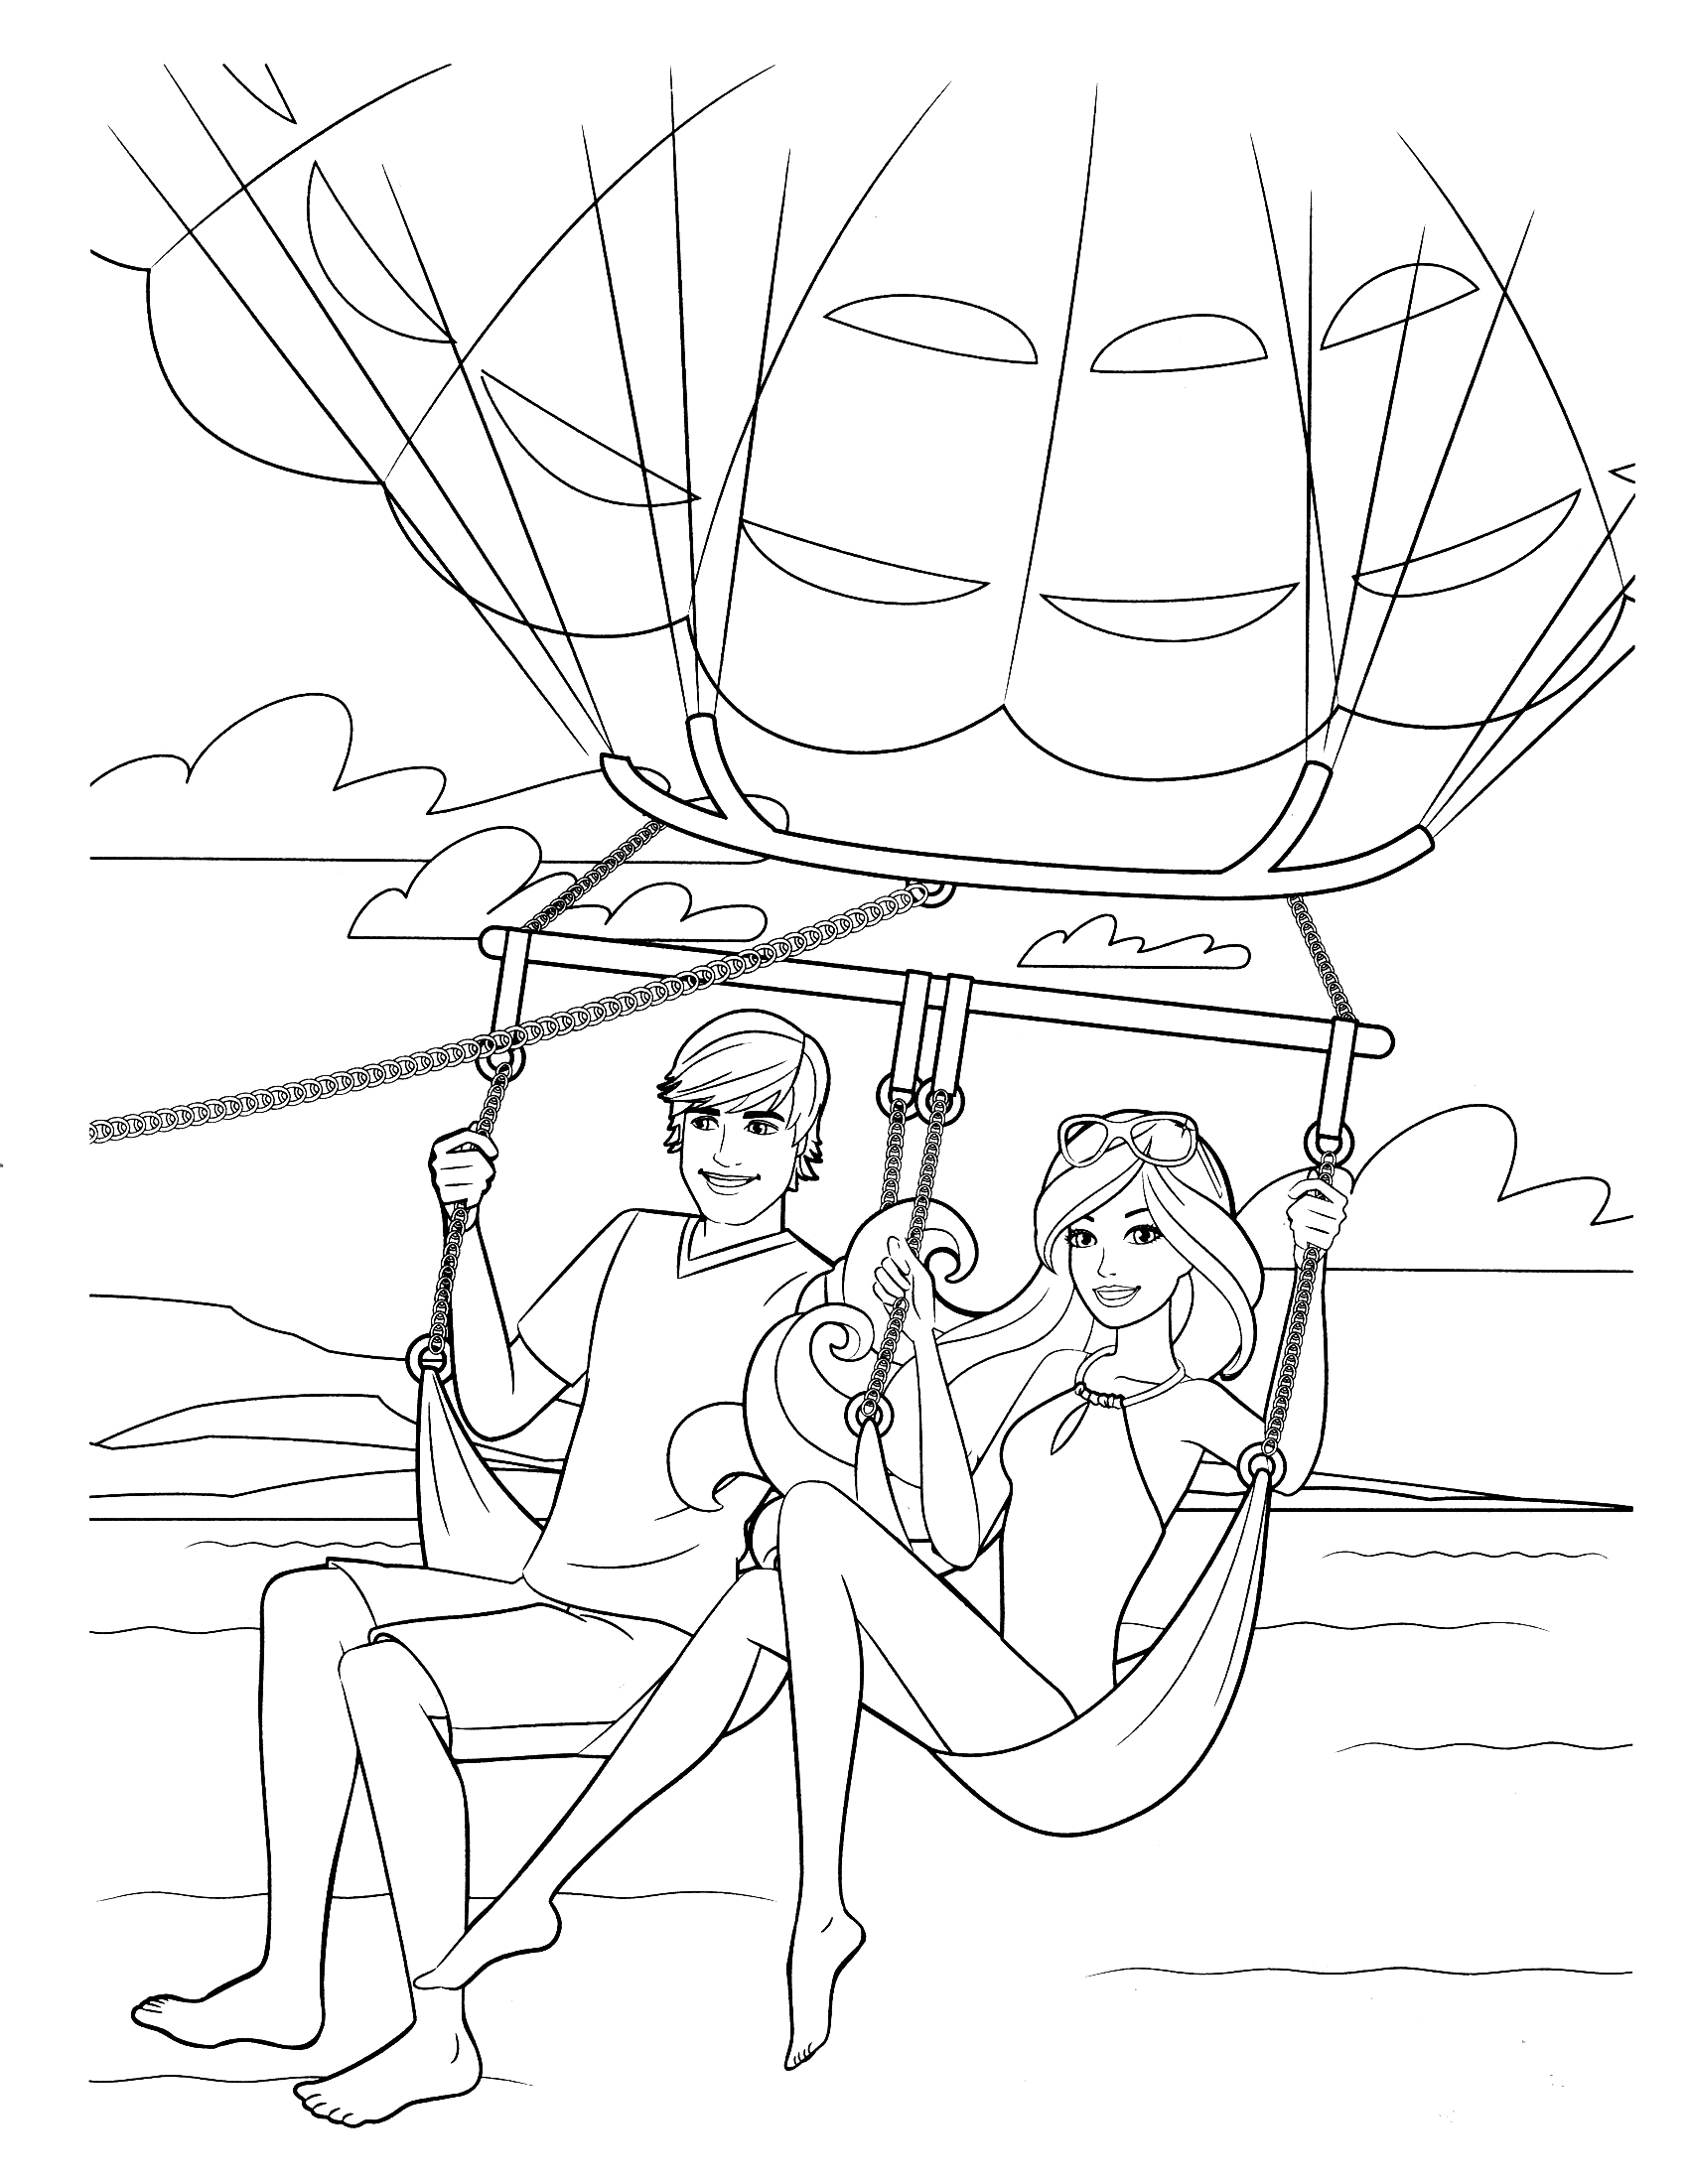 Barbie And Ken In Parachute coloring page